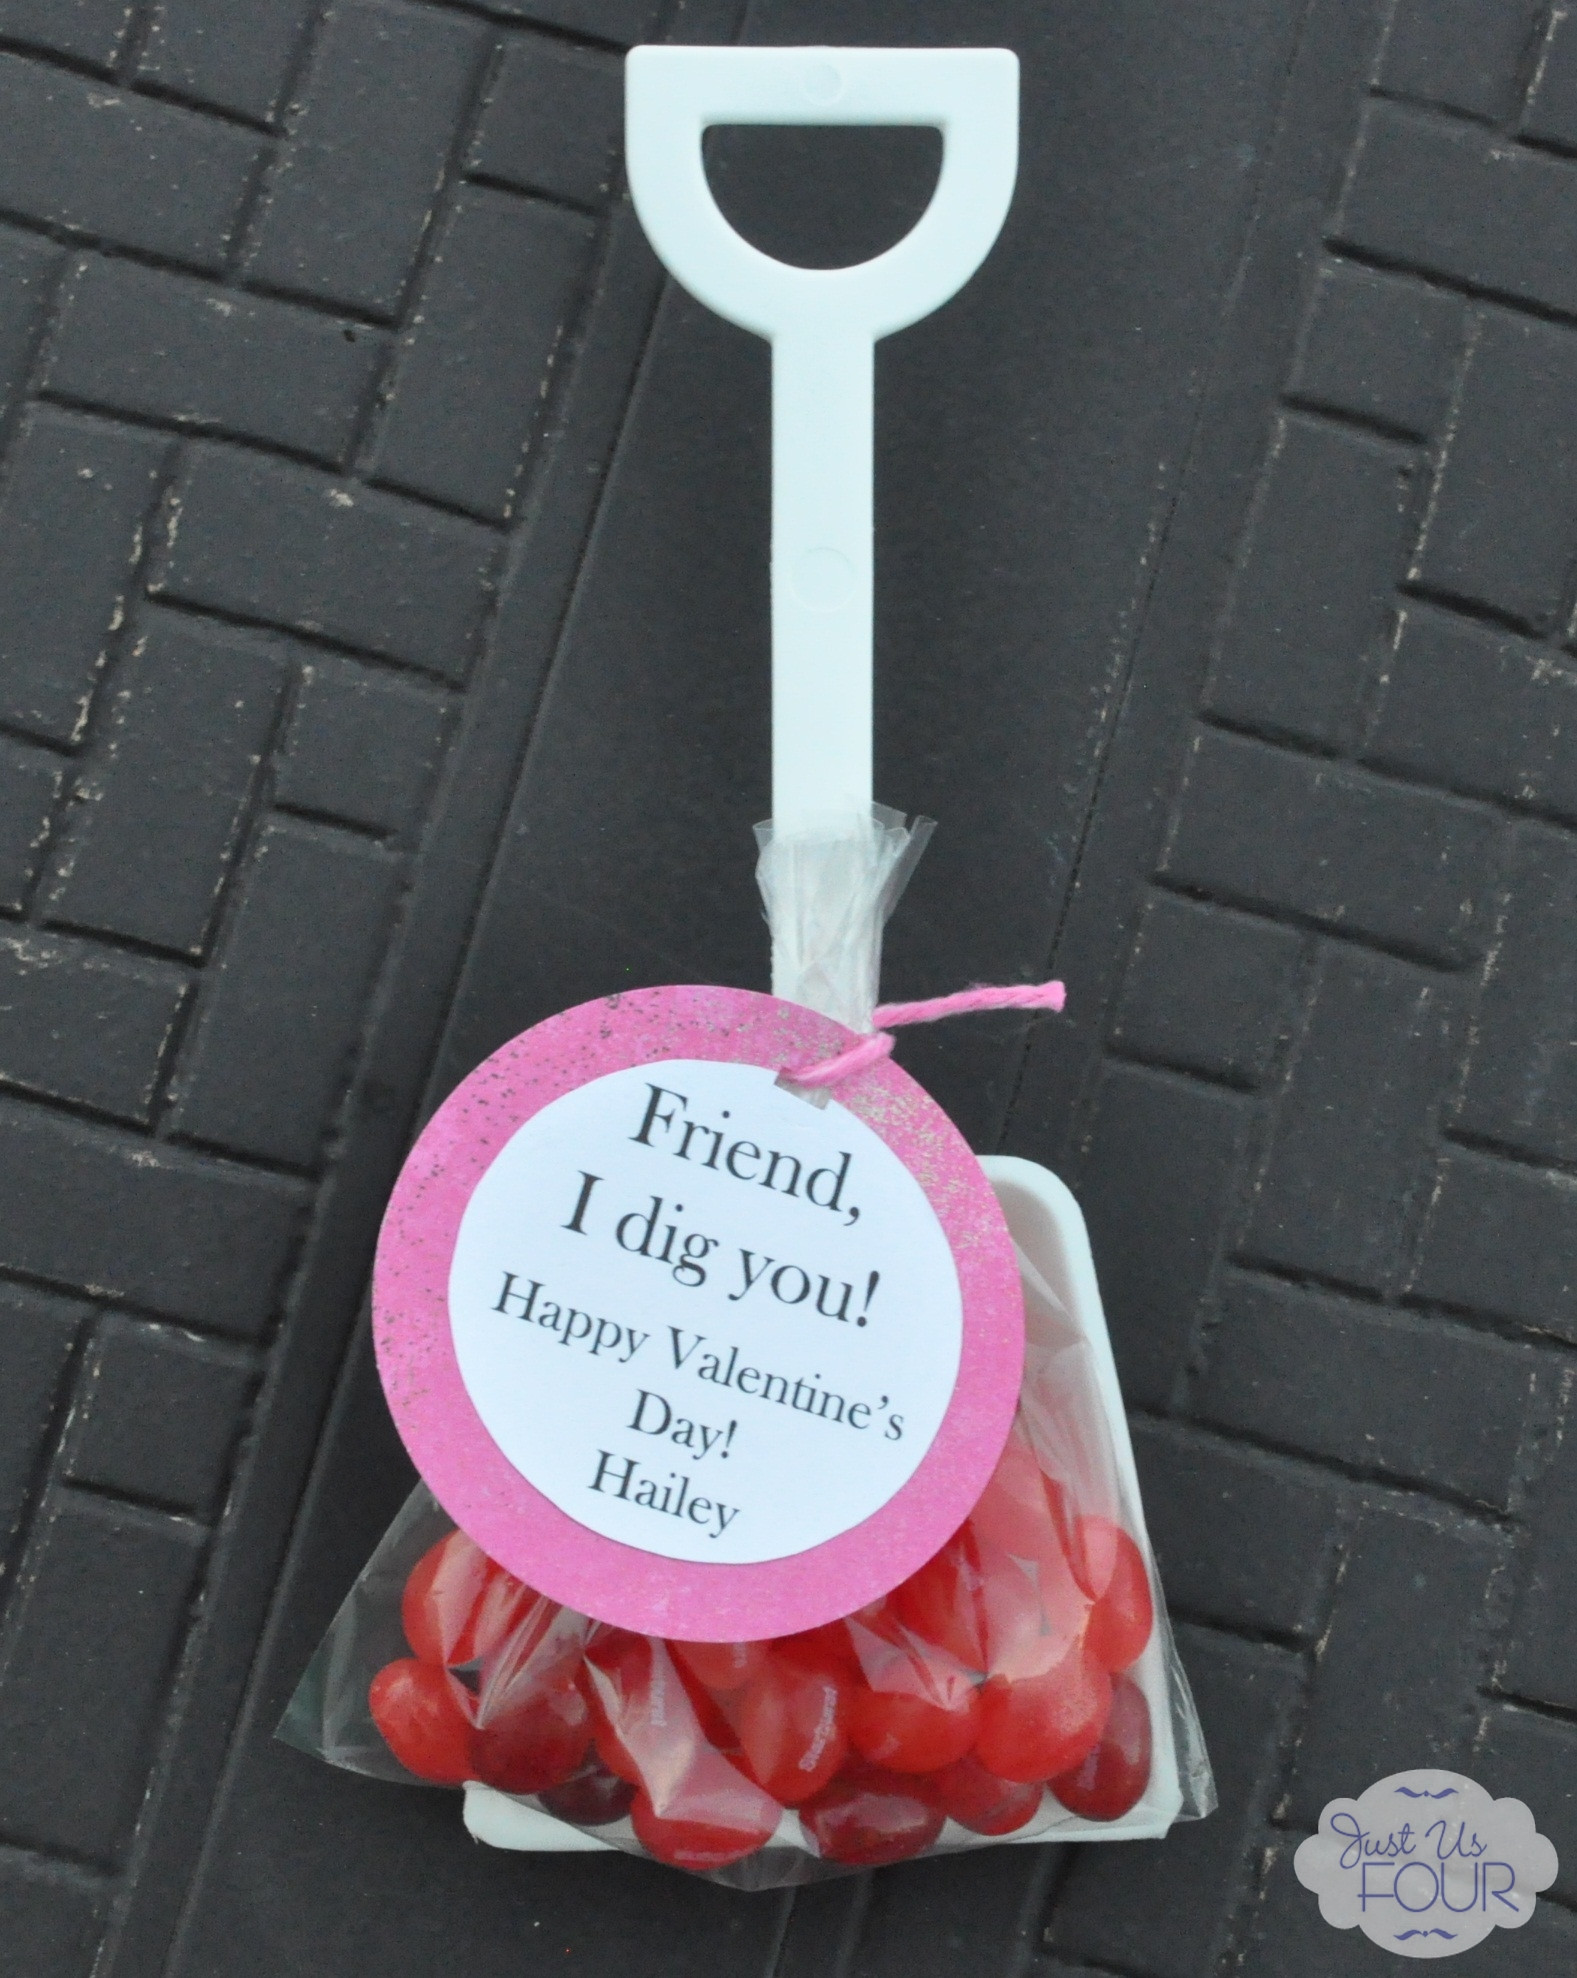 Valentine Gift Ideas For Friends
 "I Dig You" Valentines for Kids My Suburban Kitchen